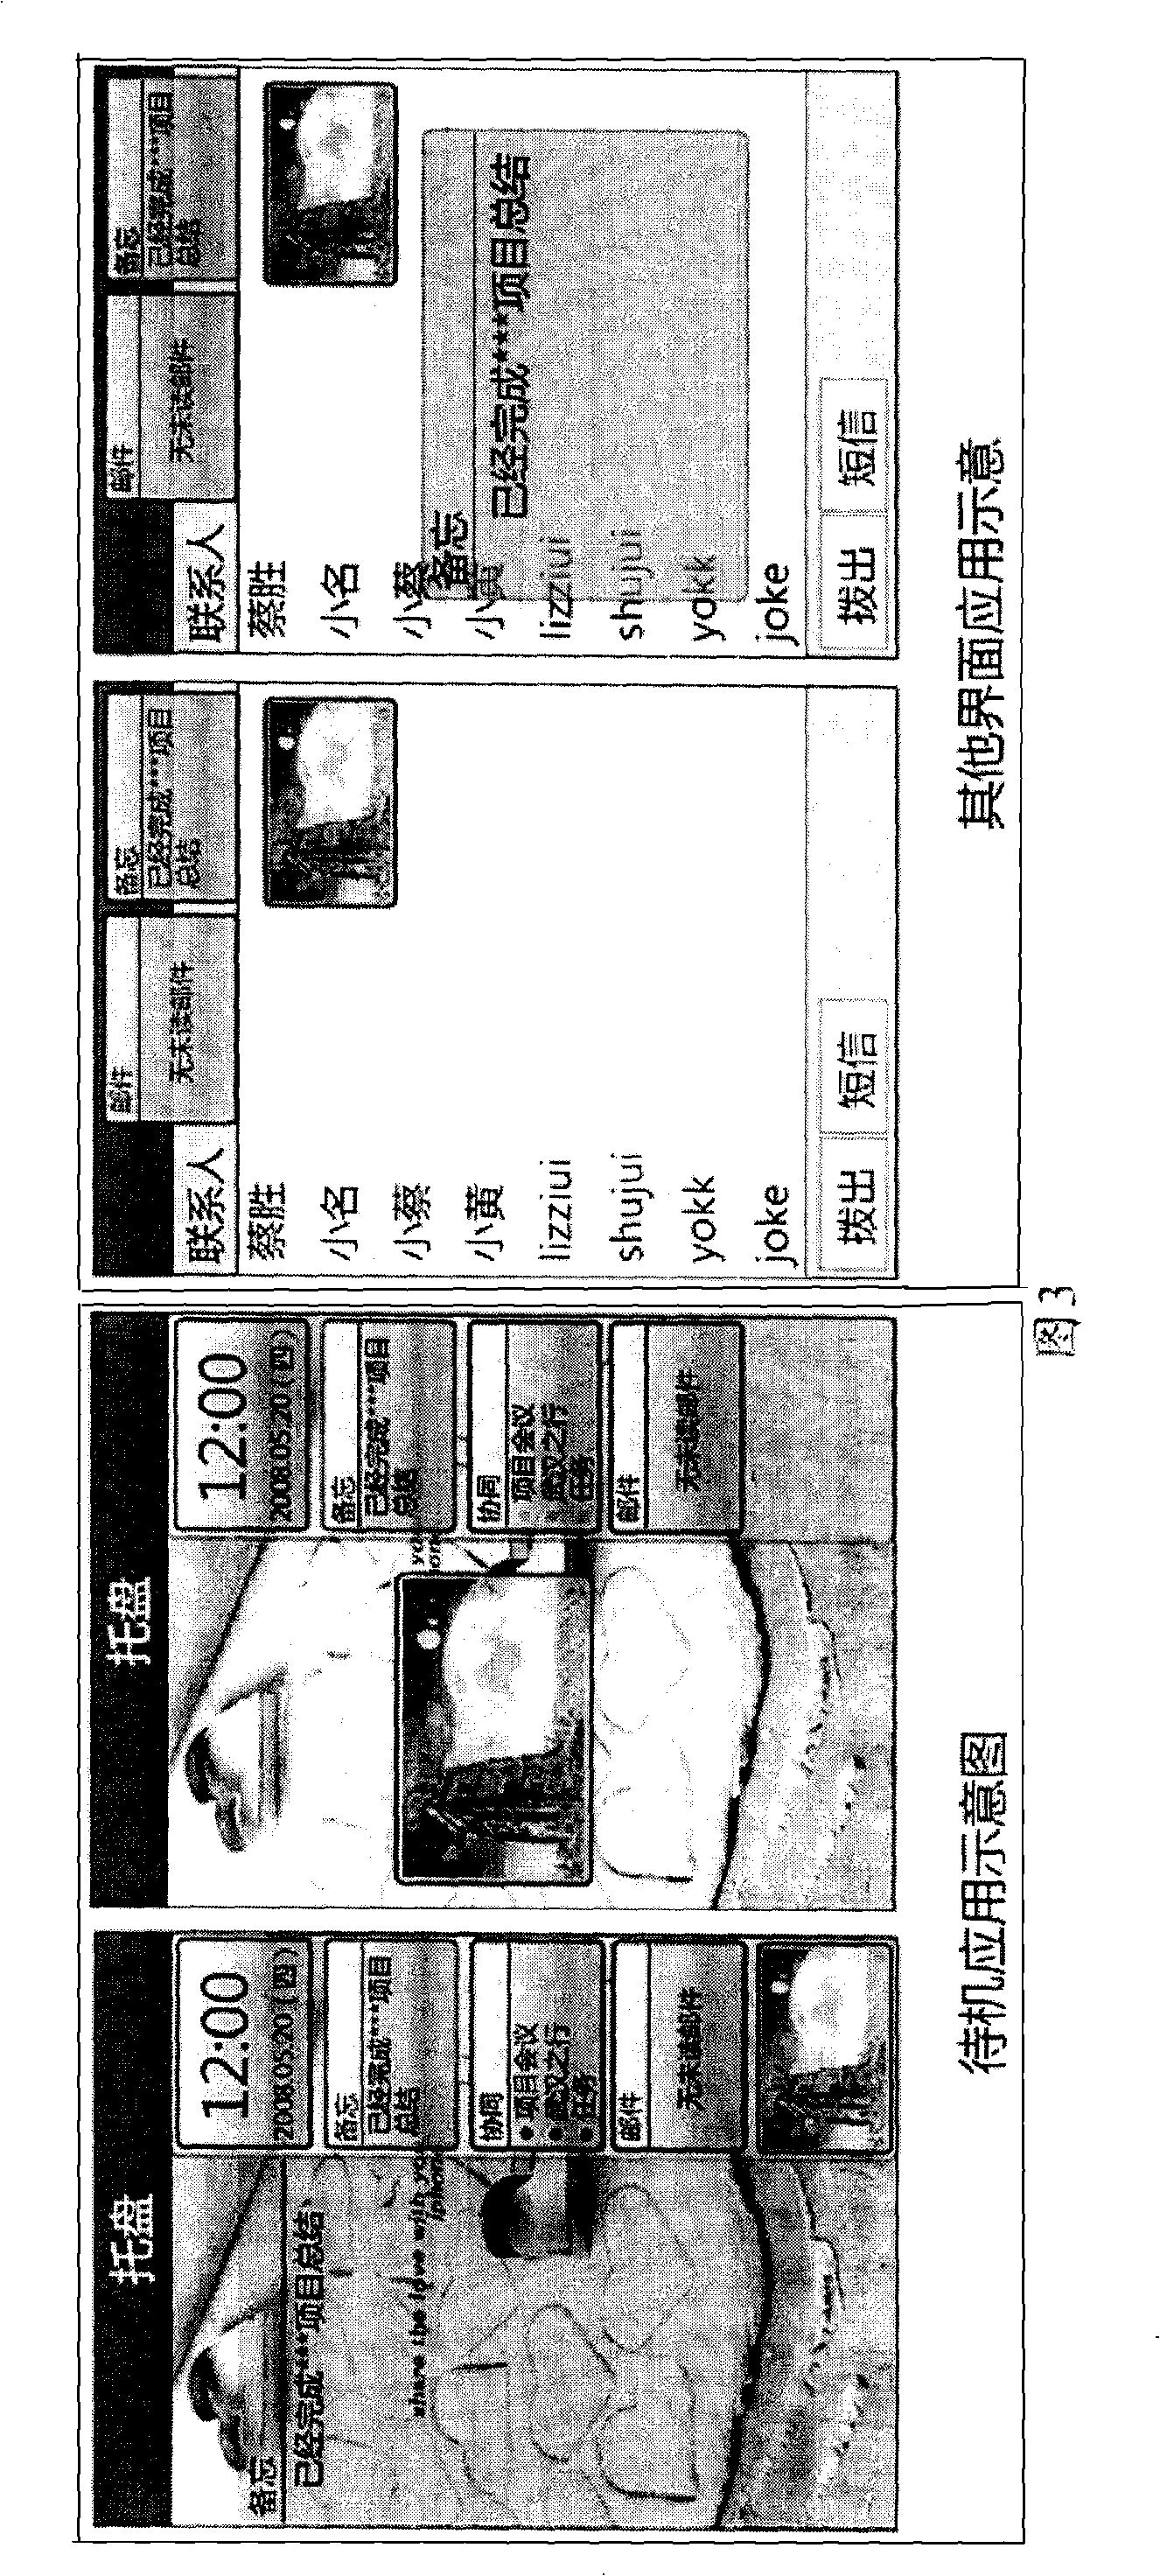 Mobile terminal, its information presentation method and system